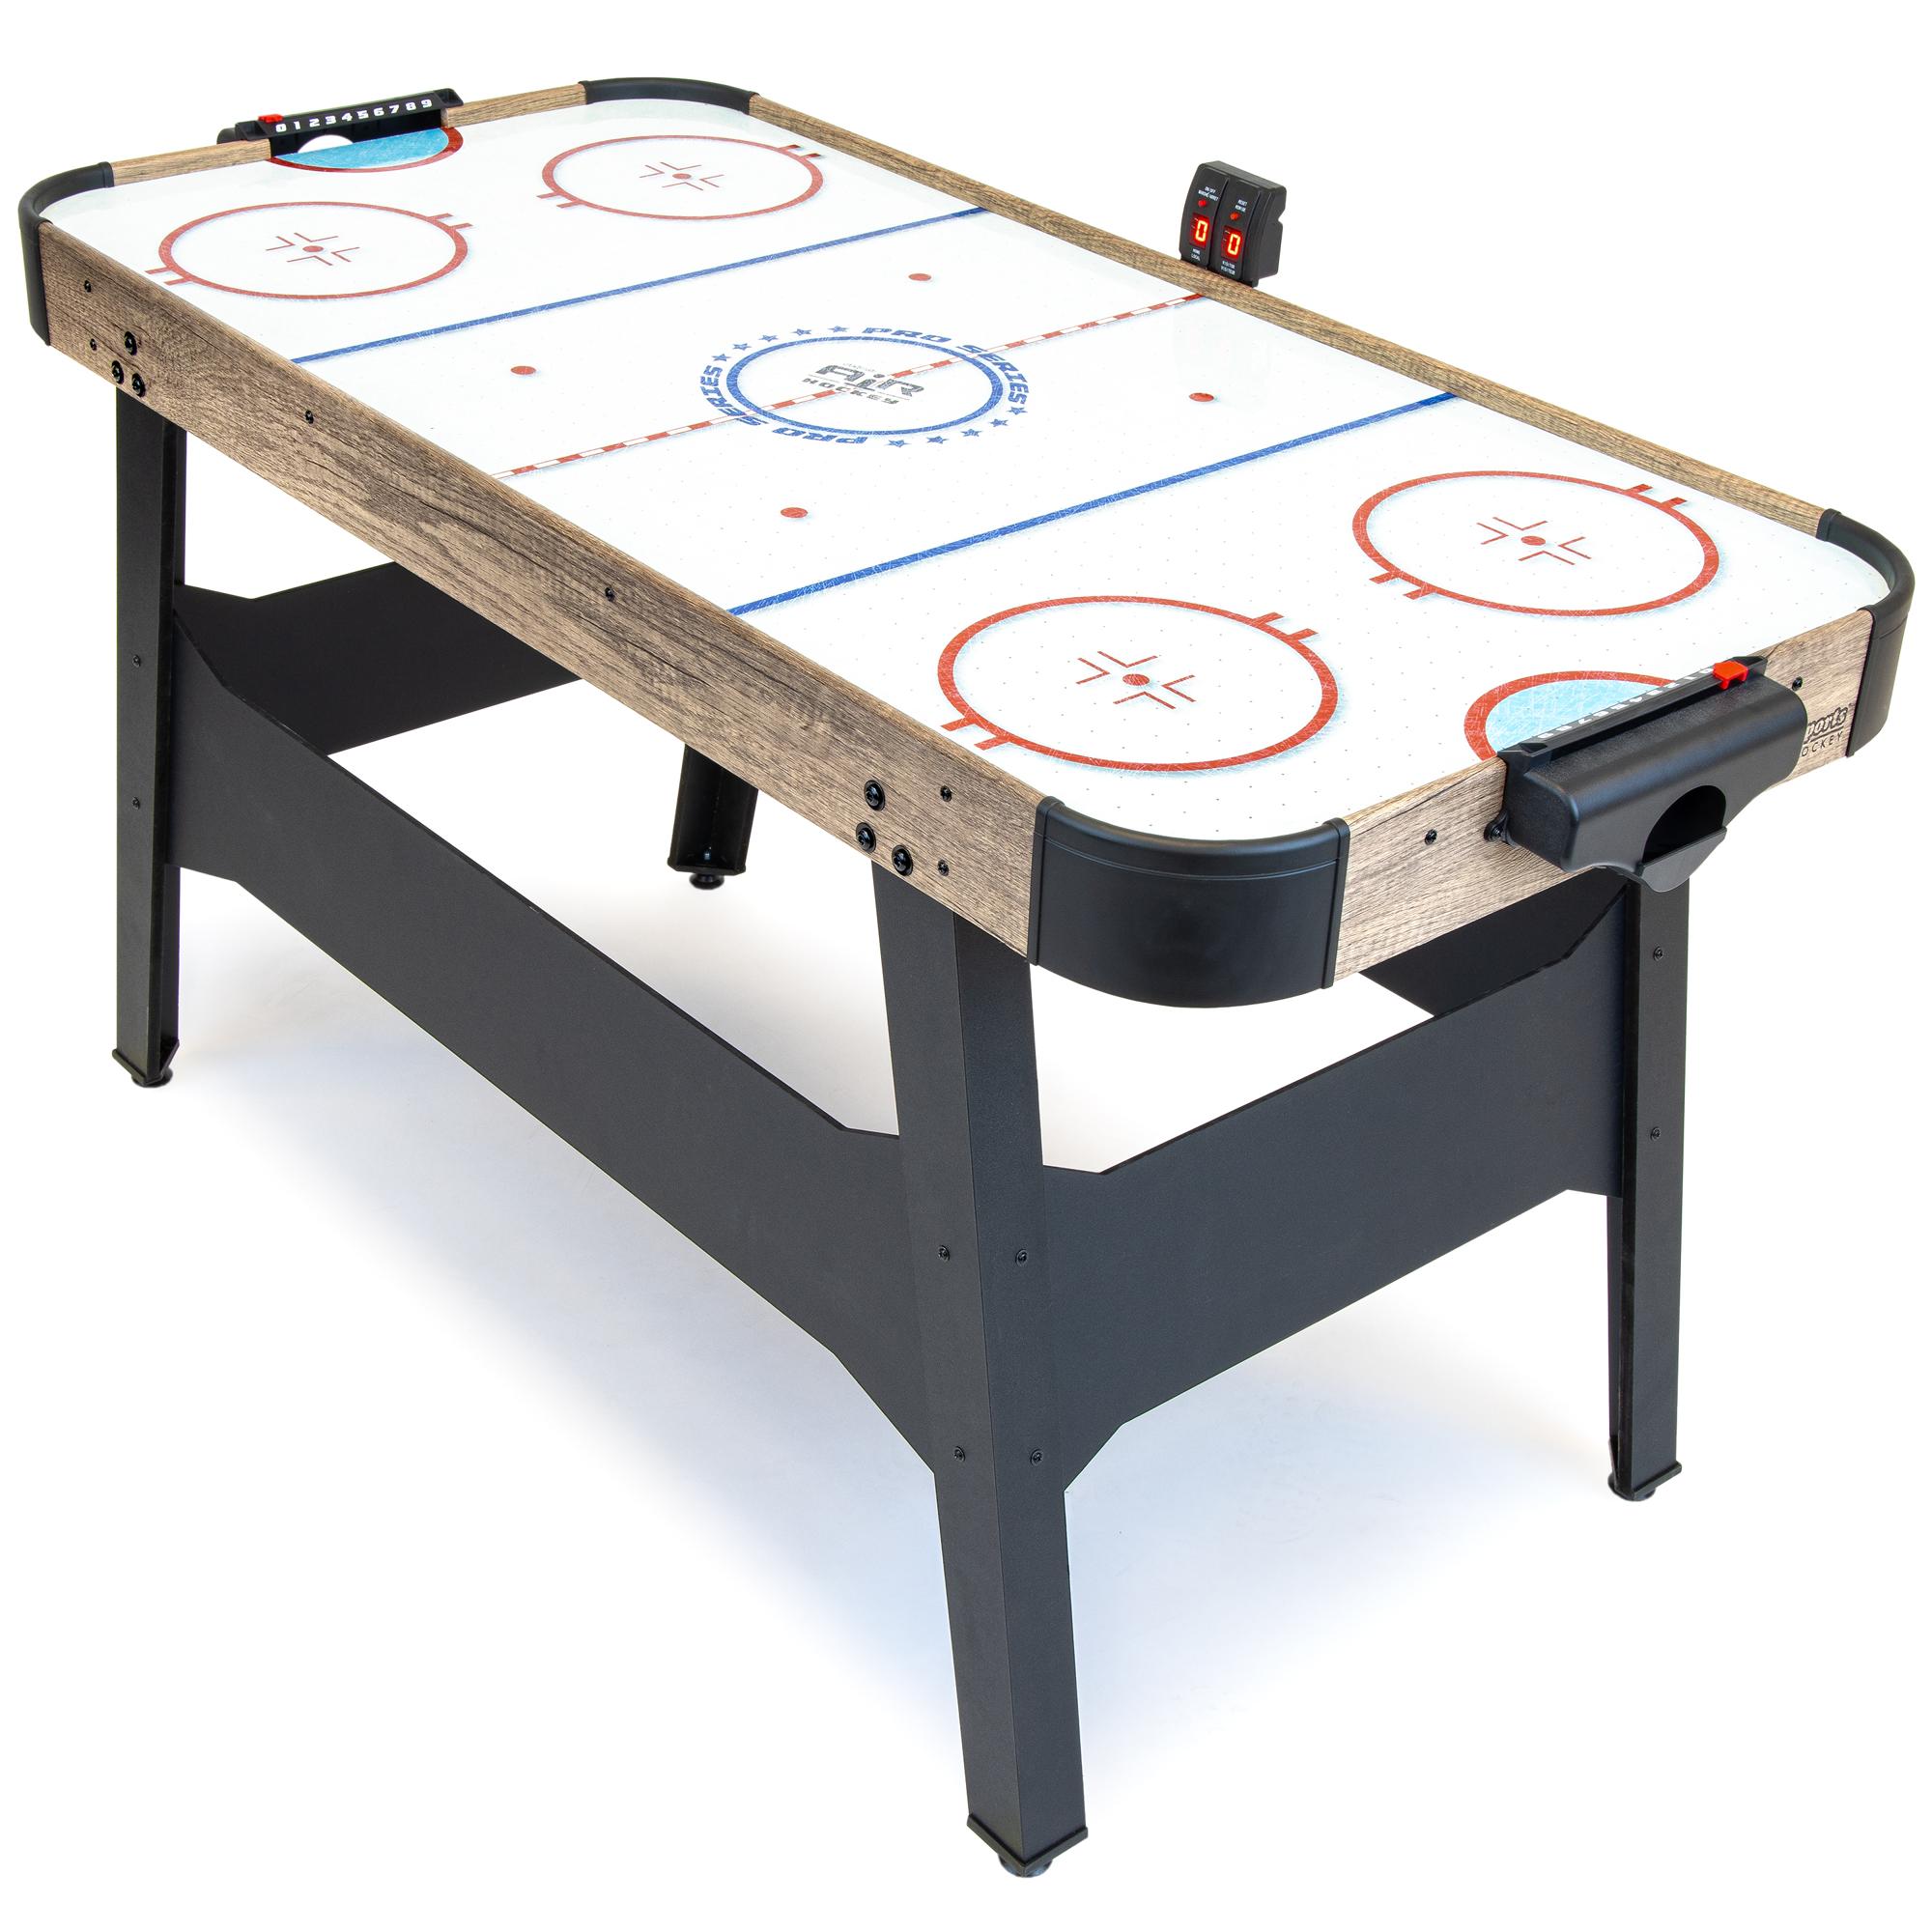 File:Air hockey table with puck and paddles.jpg - Wikimedia Commons